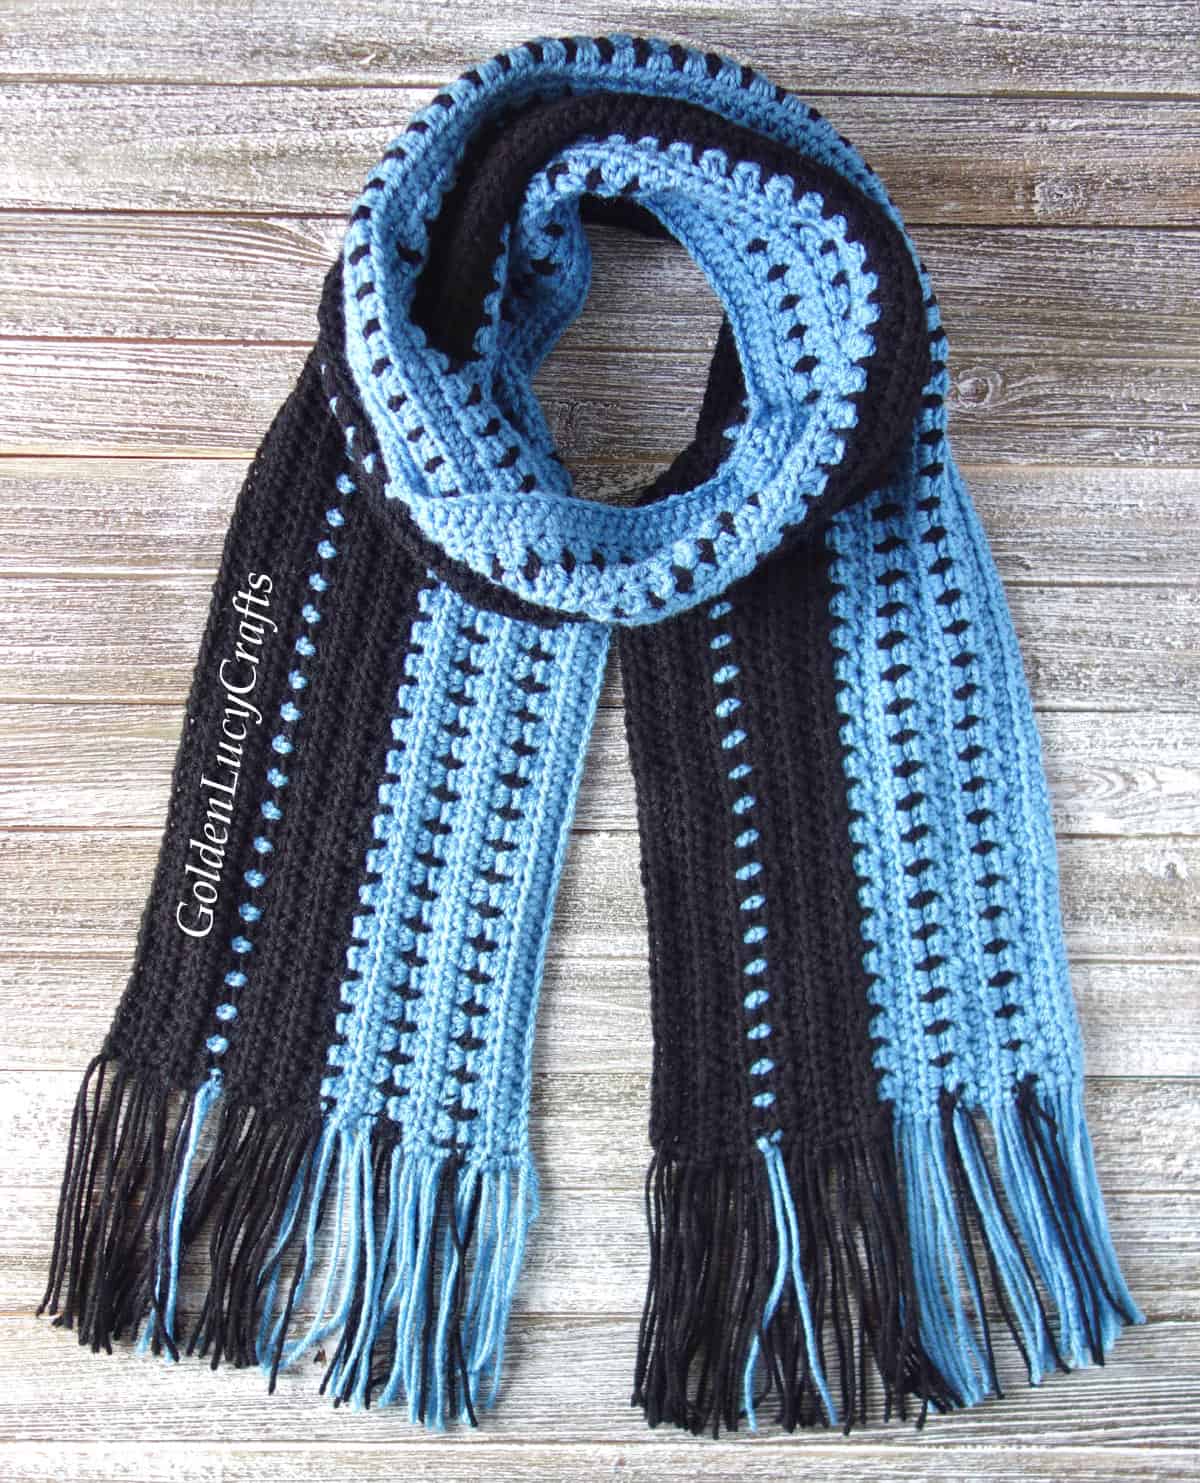 Crochet scarf in blue and black colors.